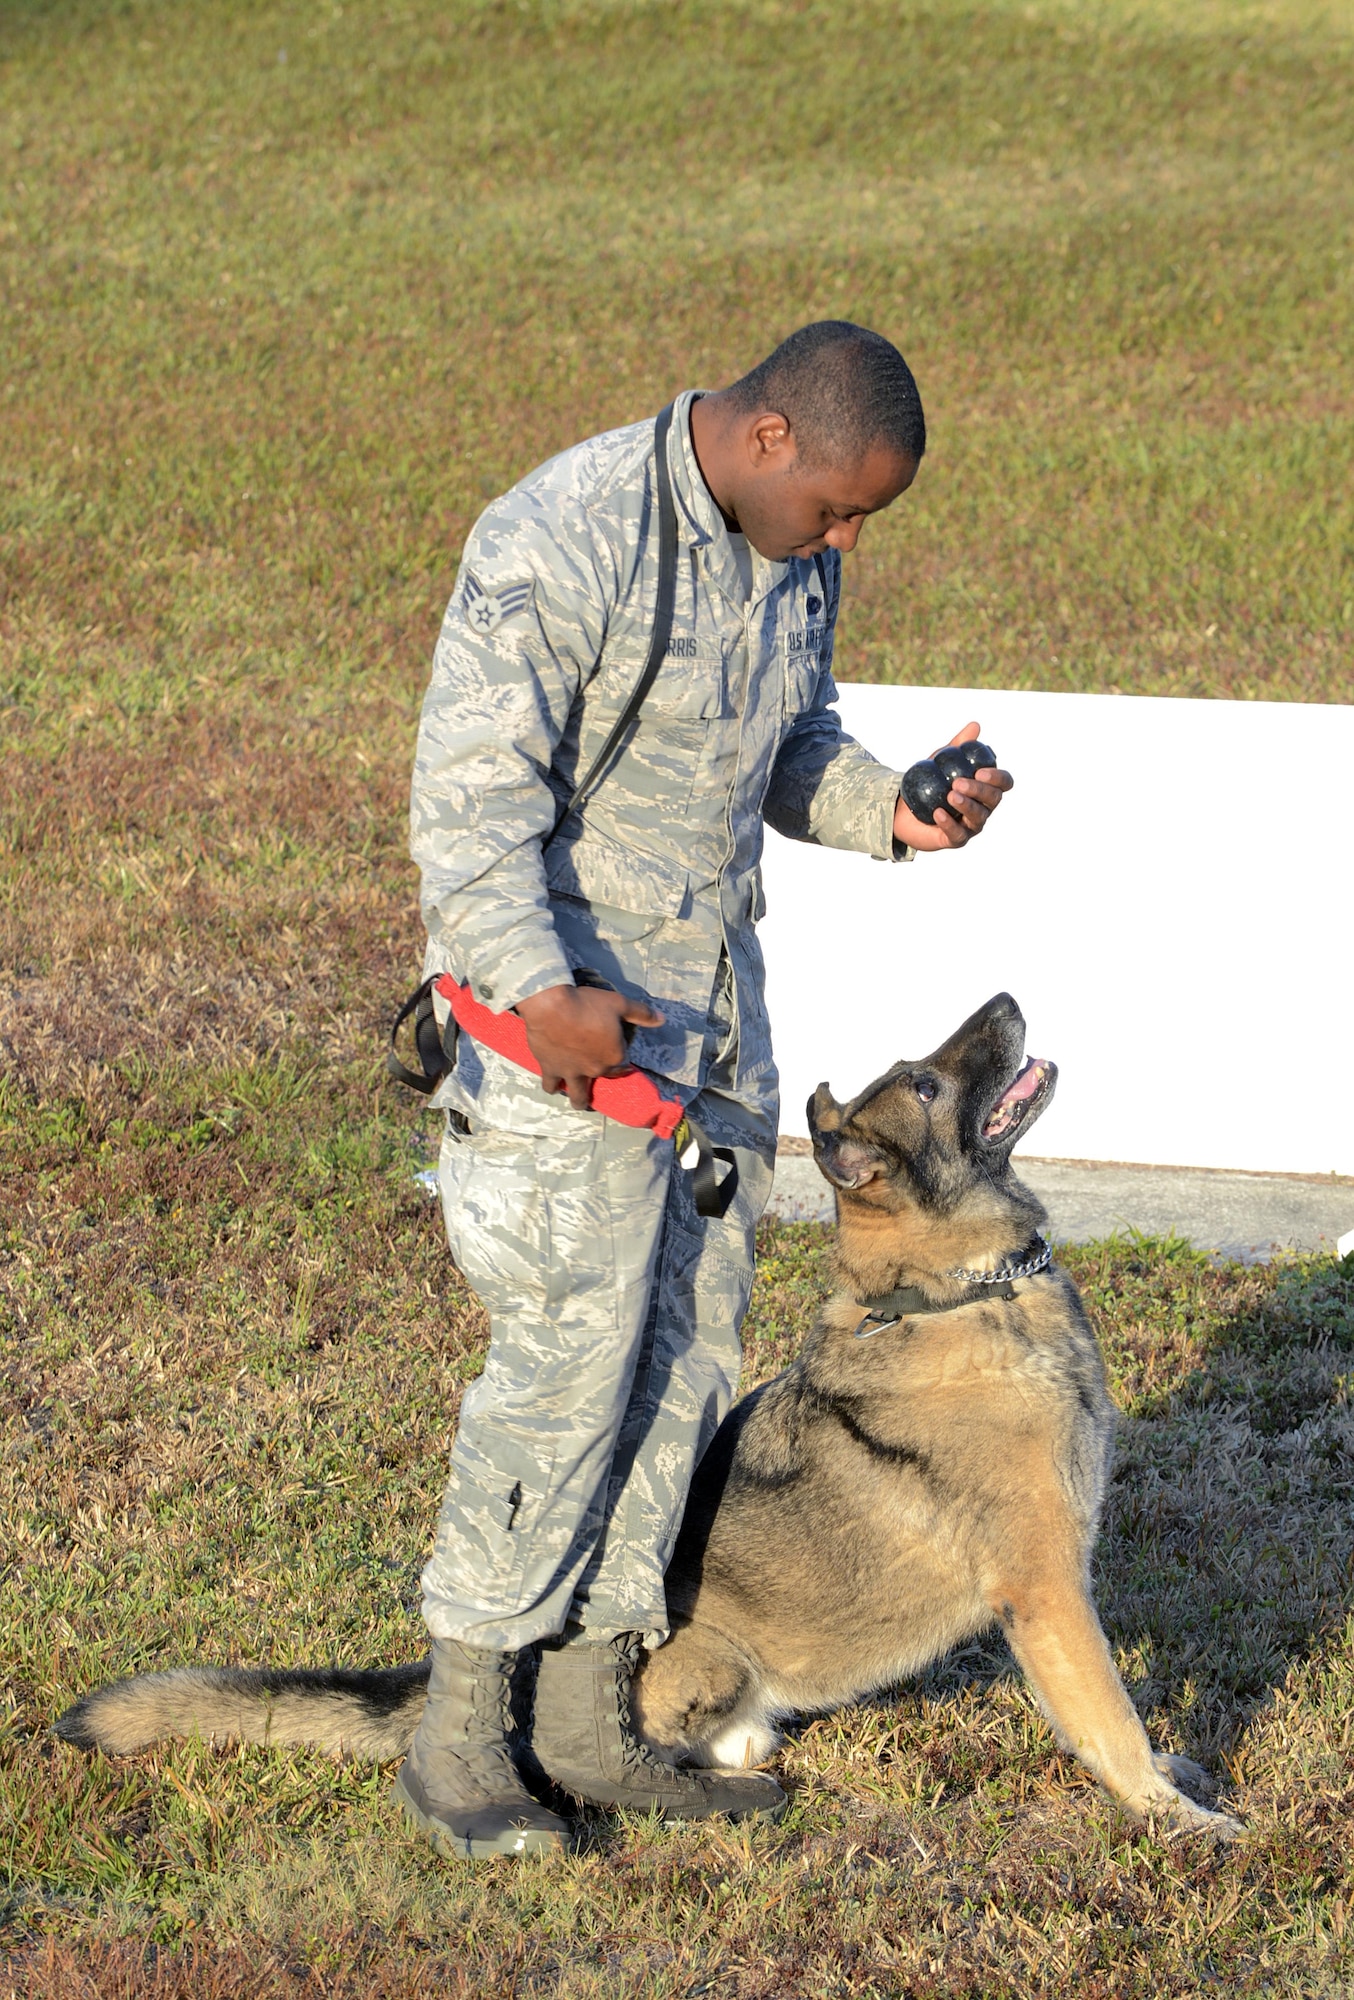 U.S. Air Force Senior Airman Dameion Morris, military working dog (MWD) handler assigned to the 6th Security Forces Squadron, plays with MWD Zoran one last time before his retirement at MacDill Air Force Base, Fla., March 29, 2017. Zoran arrived at MacDill in 2010, and has deployed twice during his seven years of service. (U.S. Air Force photo by Senior Airman Tori Schultz)